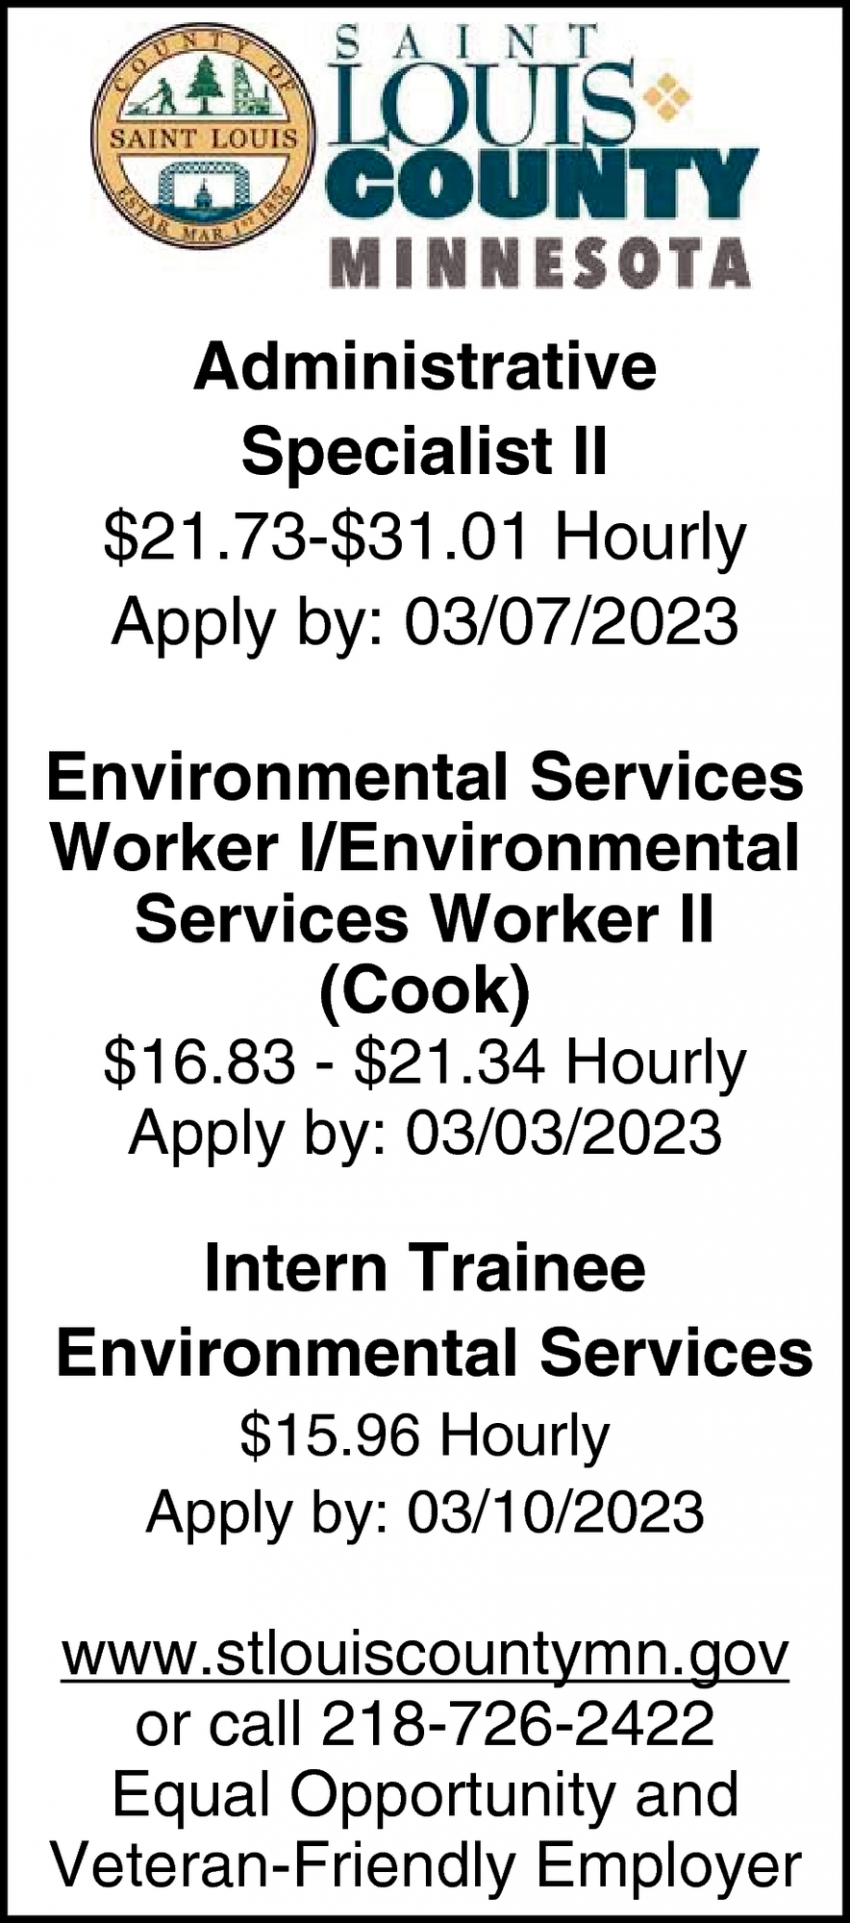 Administrative Specialist, Environmental Services Worker